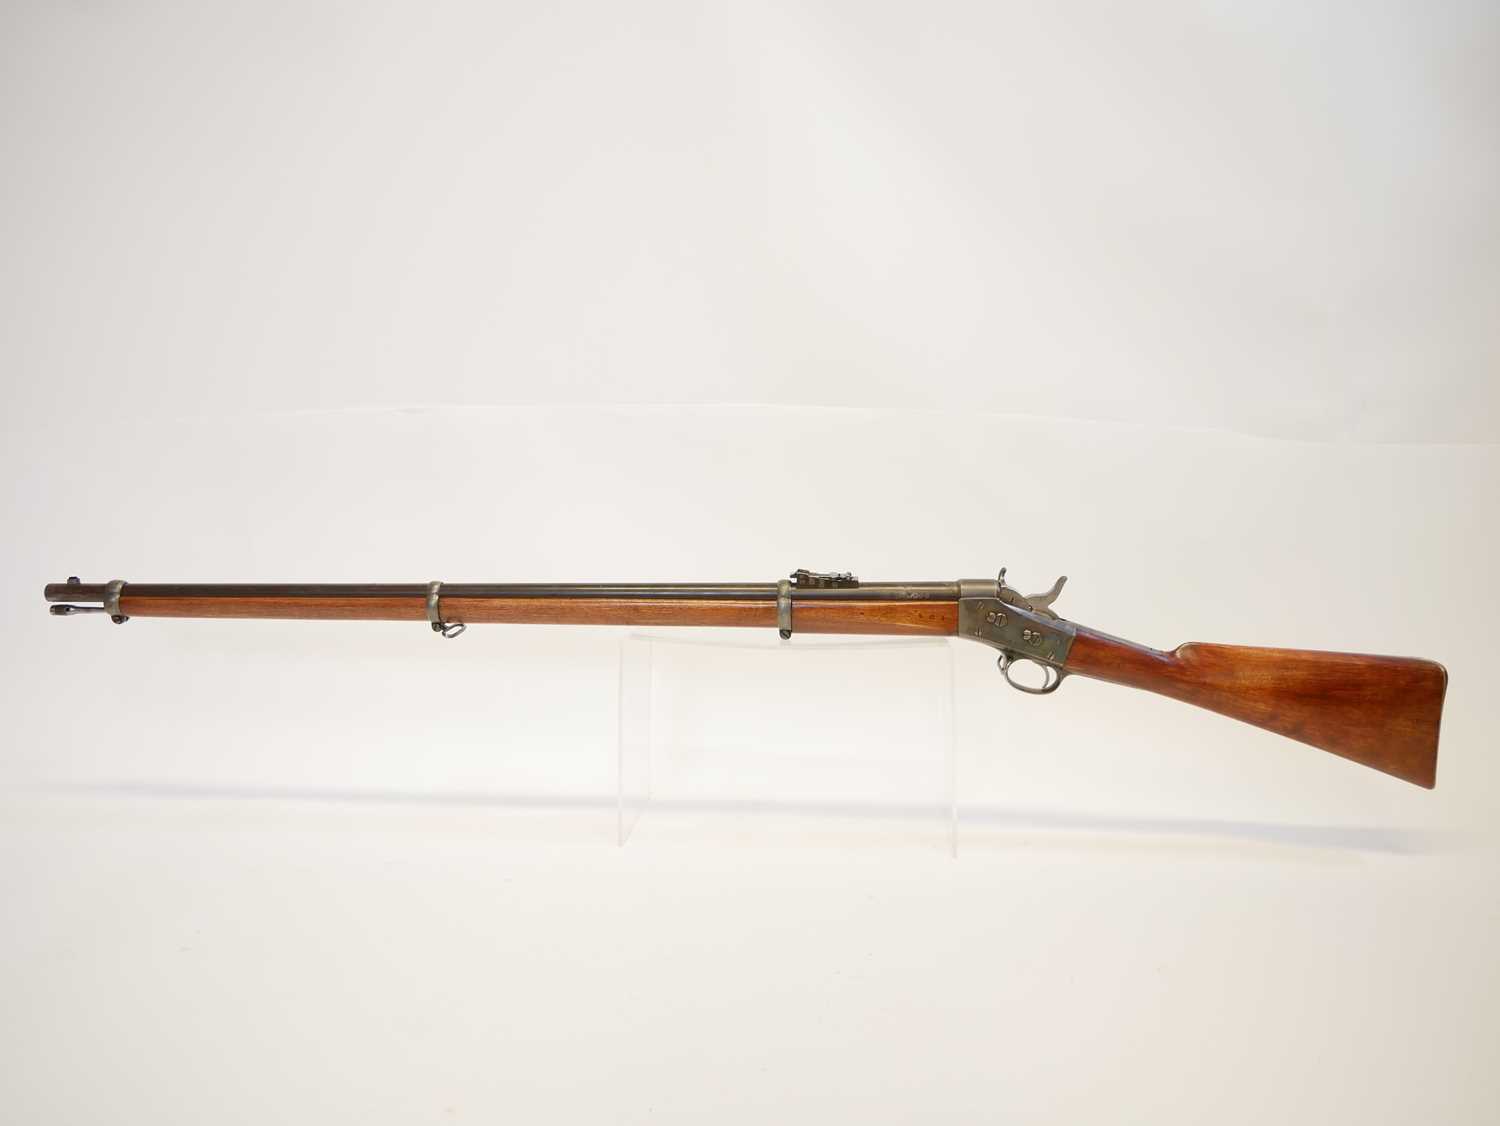 Swedish Remington 12.11x44R M1867 rolling block rifle, serial number 2401, 36inch barrel secured - Image 13 of 13